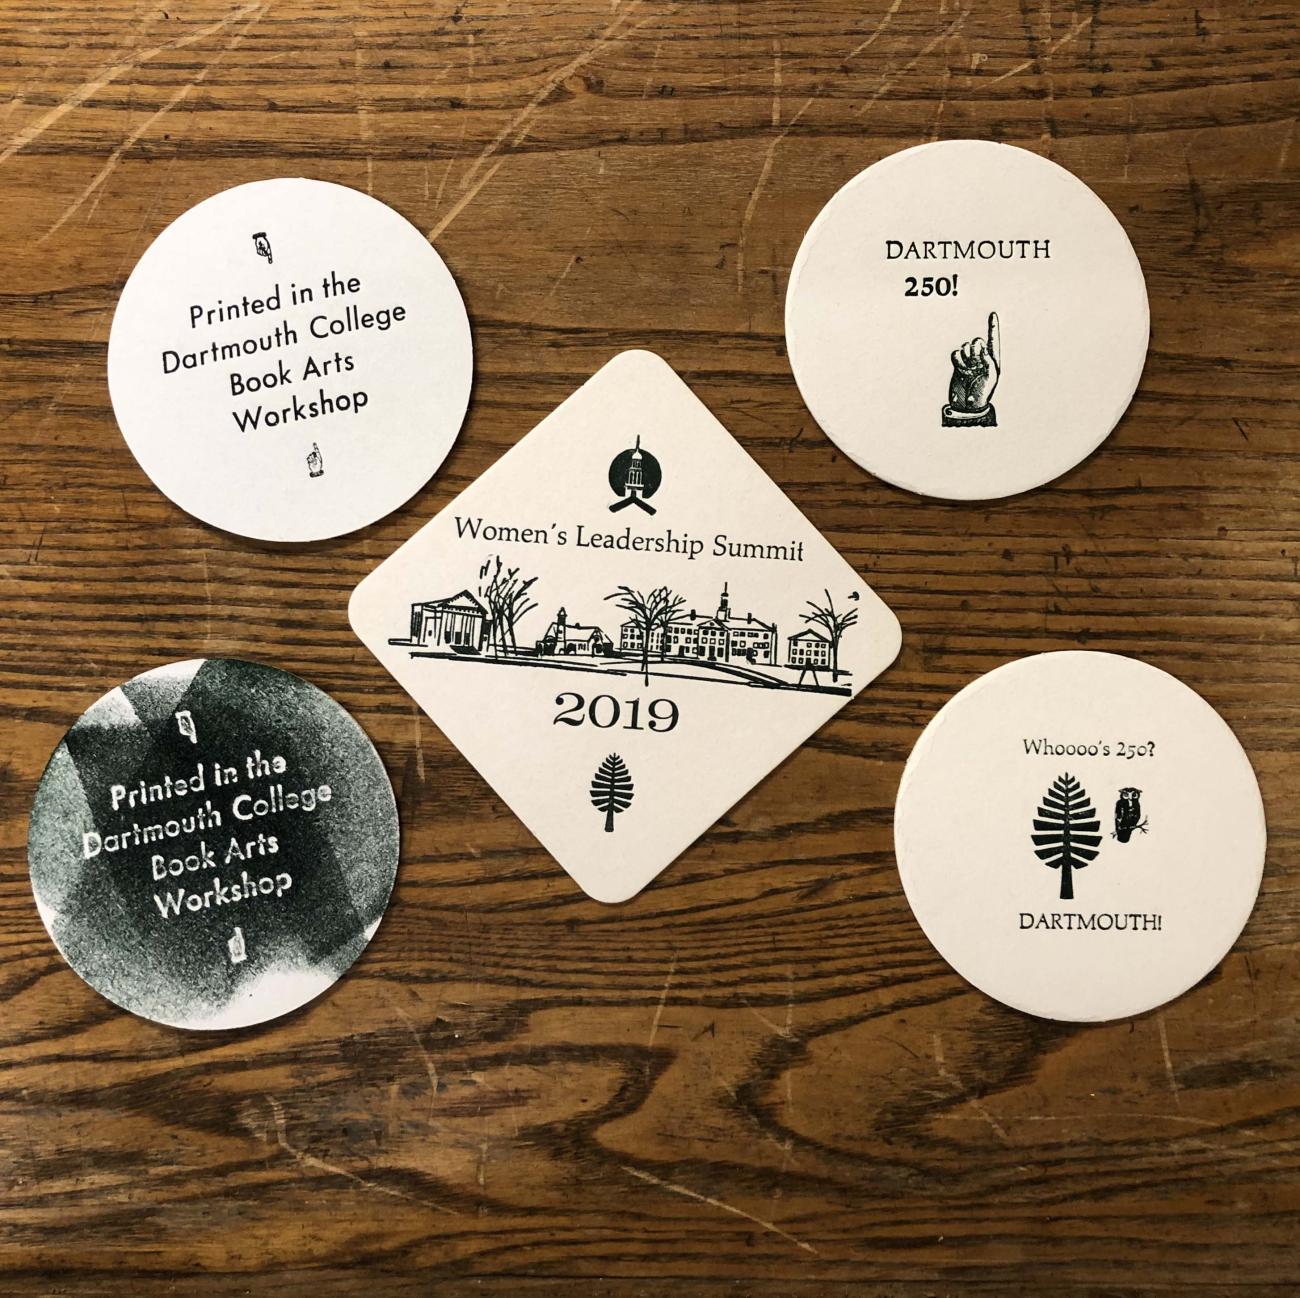 Coasters created at BAW, all printed in Dartmouth green!